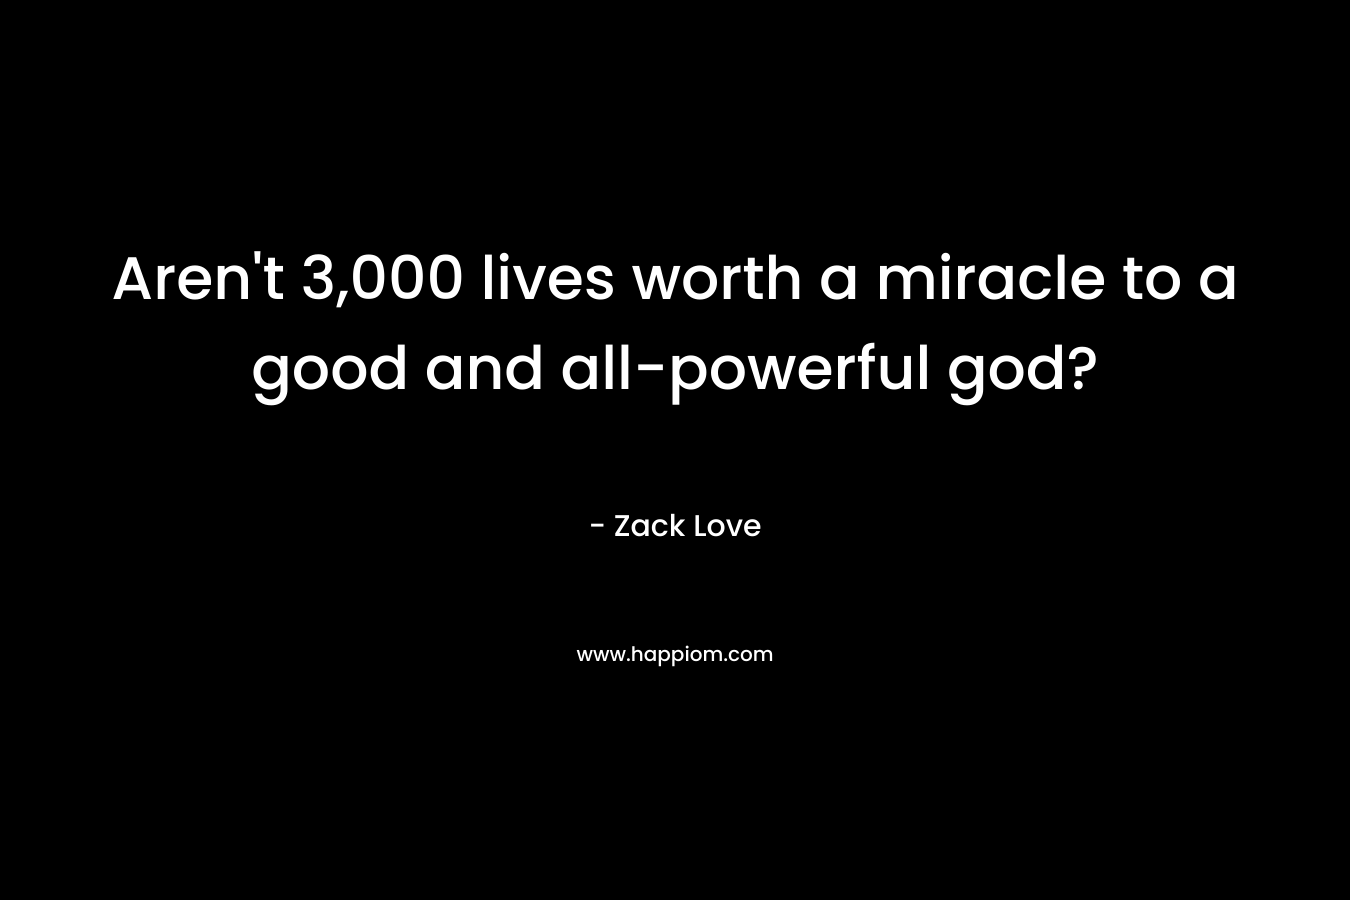 Aren't 3,000 lives worth a miracle to a good and all-powerful god?